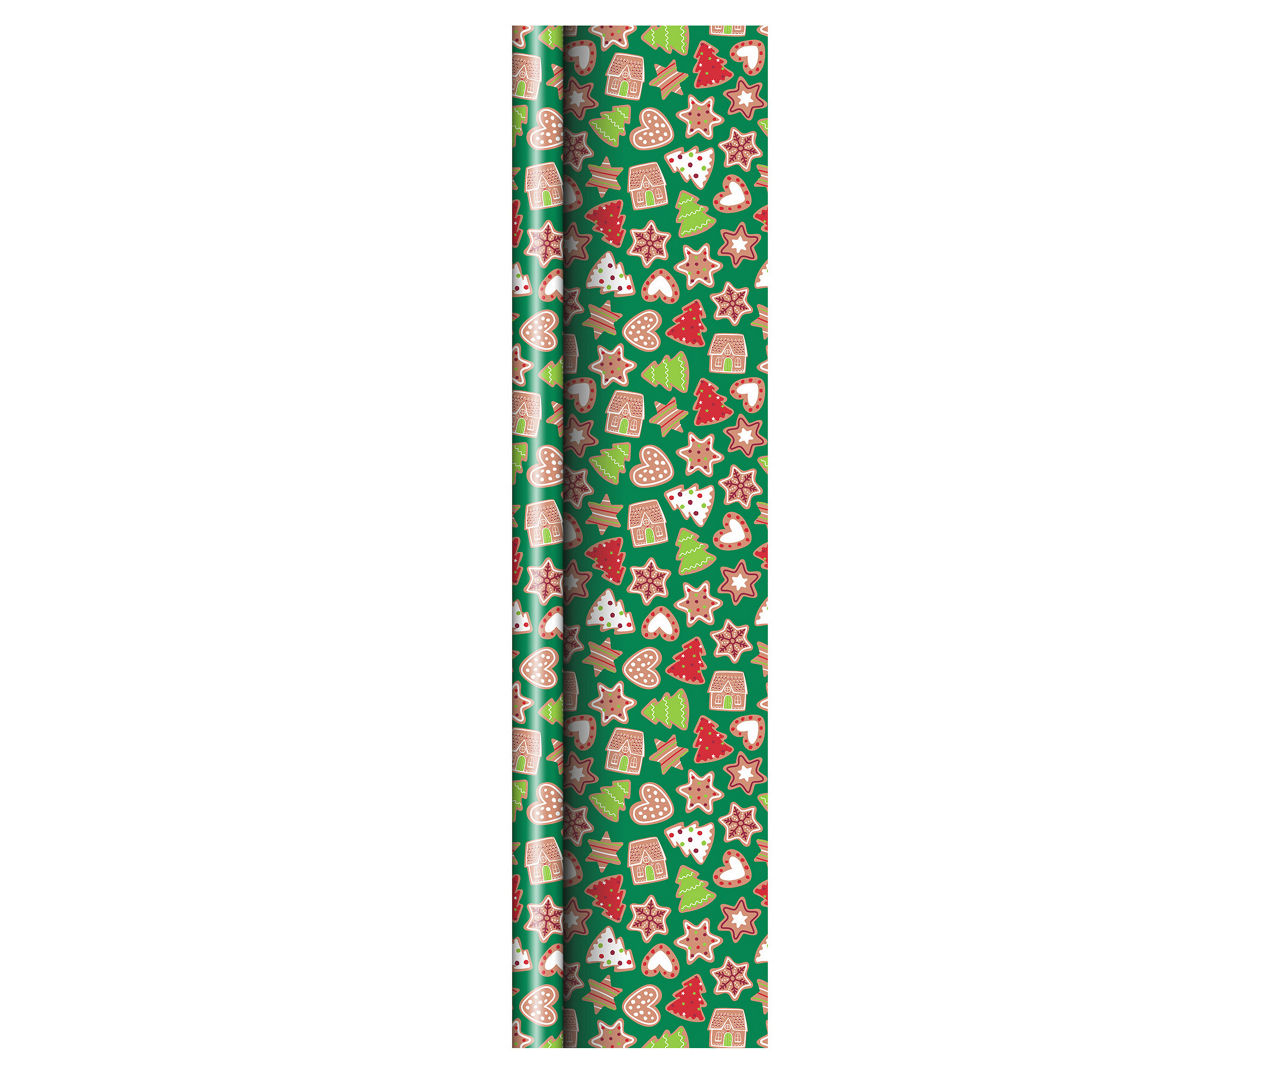 Wrapping Paper Roll 500mm X 60m Xmas Green 80GSM - Stanley Packaging